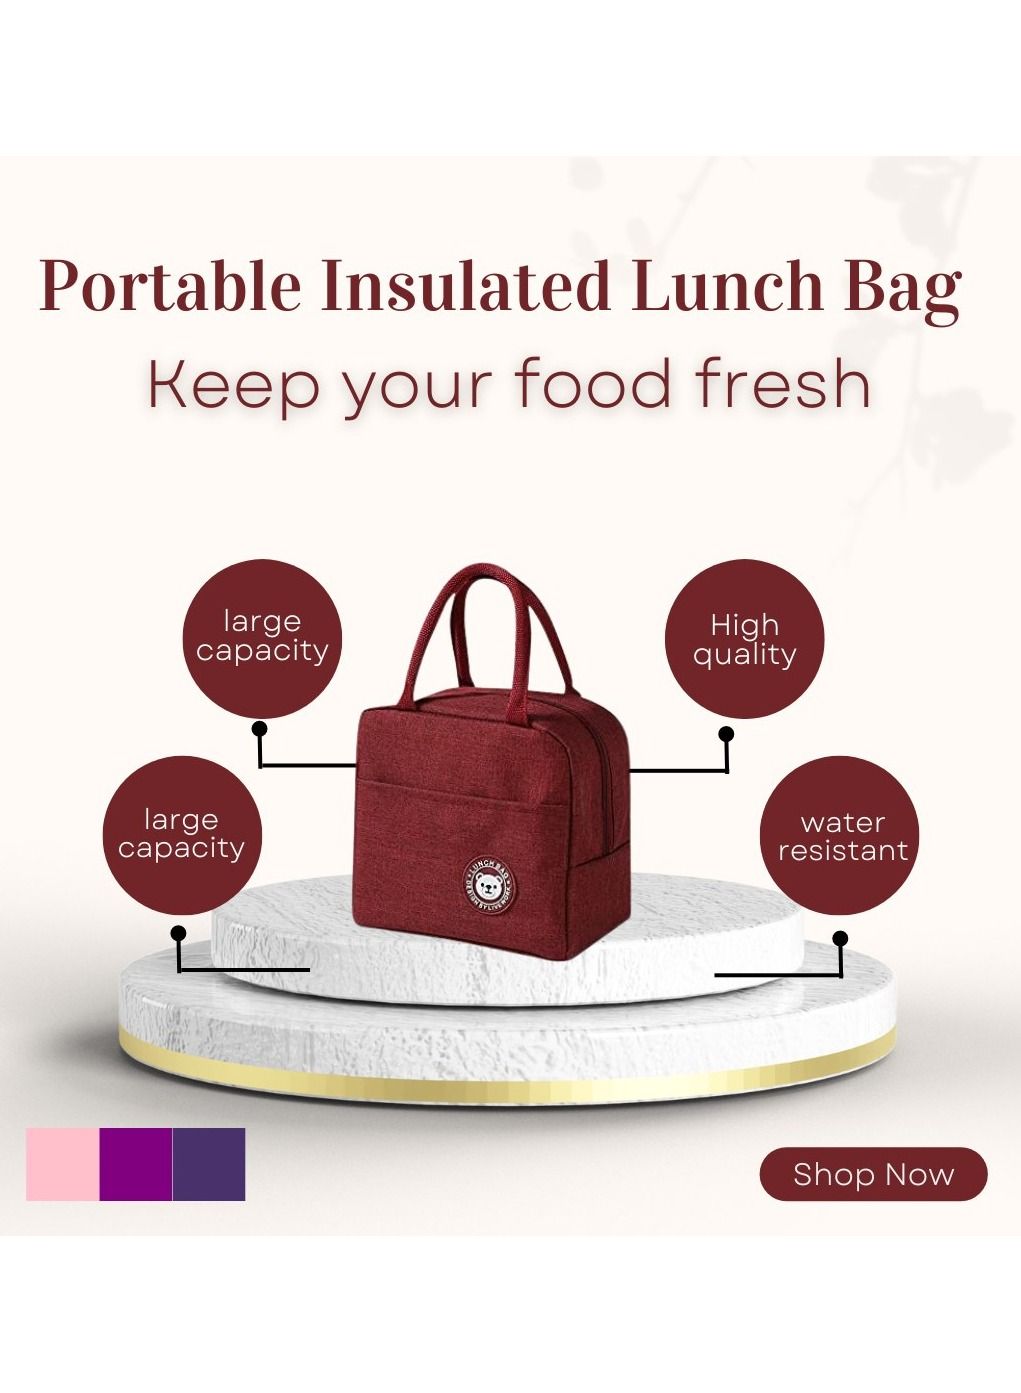 Robust Insulated Lunch Bags For Women and Men, Leak-Proof Water-Resistant Cooler Tote Bag Container For Adults, Kids, Light-Weight Portable Lunch Box For Office Work, Outdoor, Picnic, School (Red) 